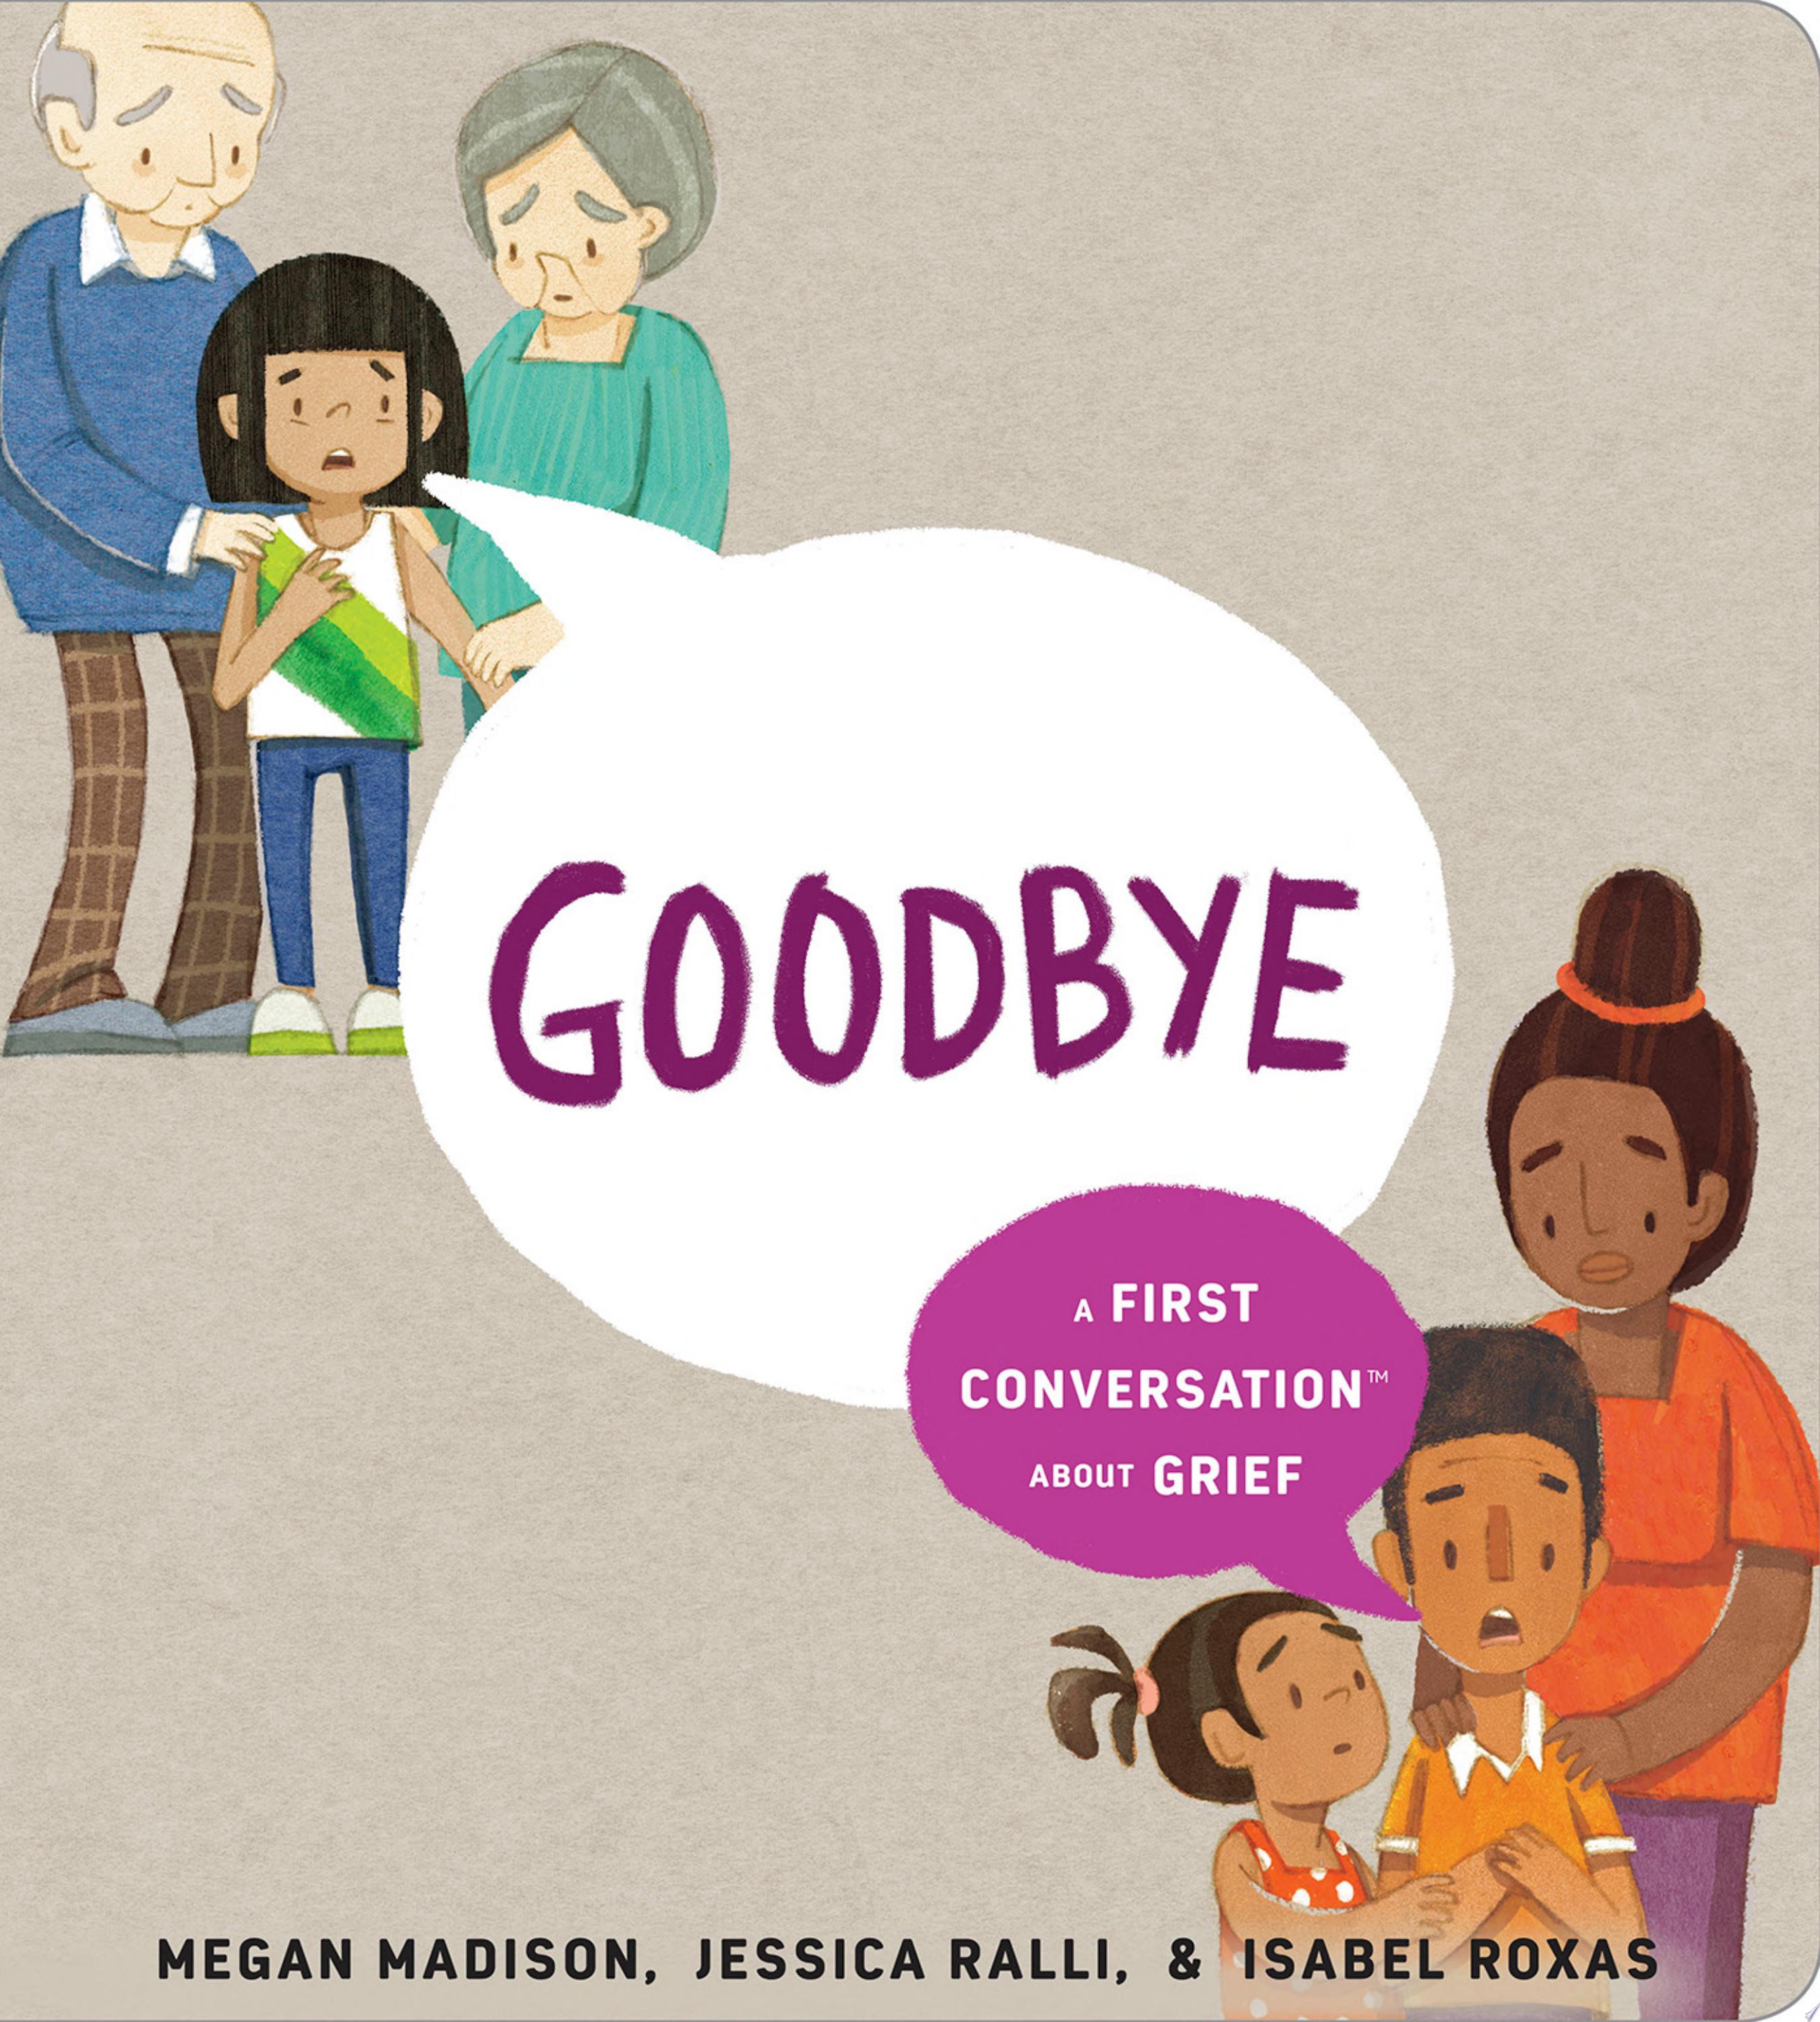 Image for "Goodbye: A First Conversation About Grief"